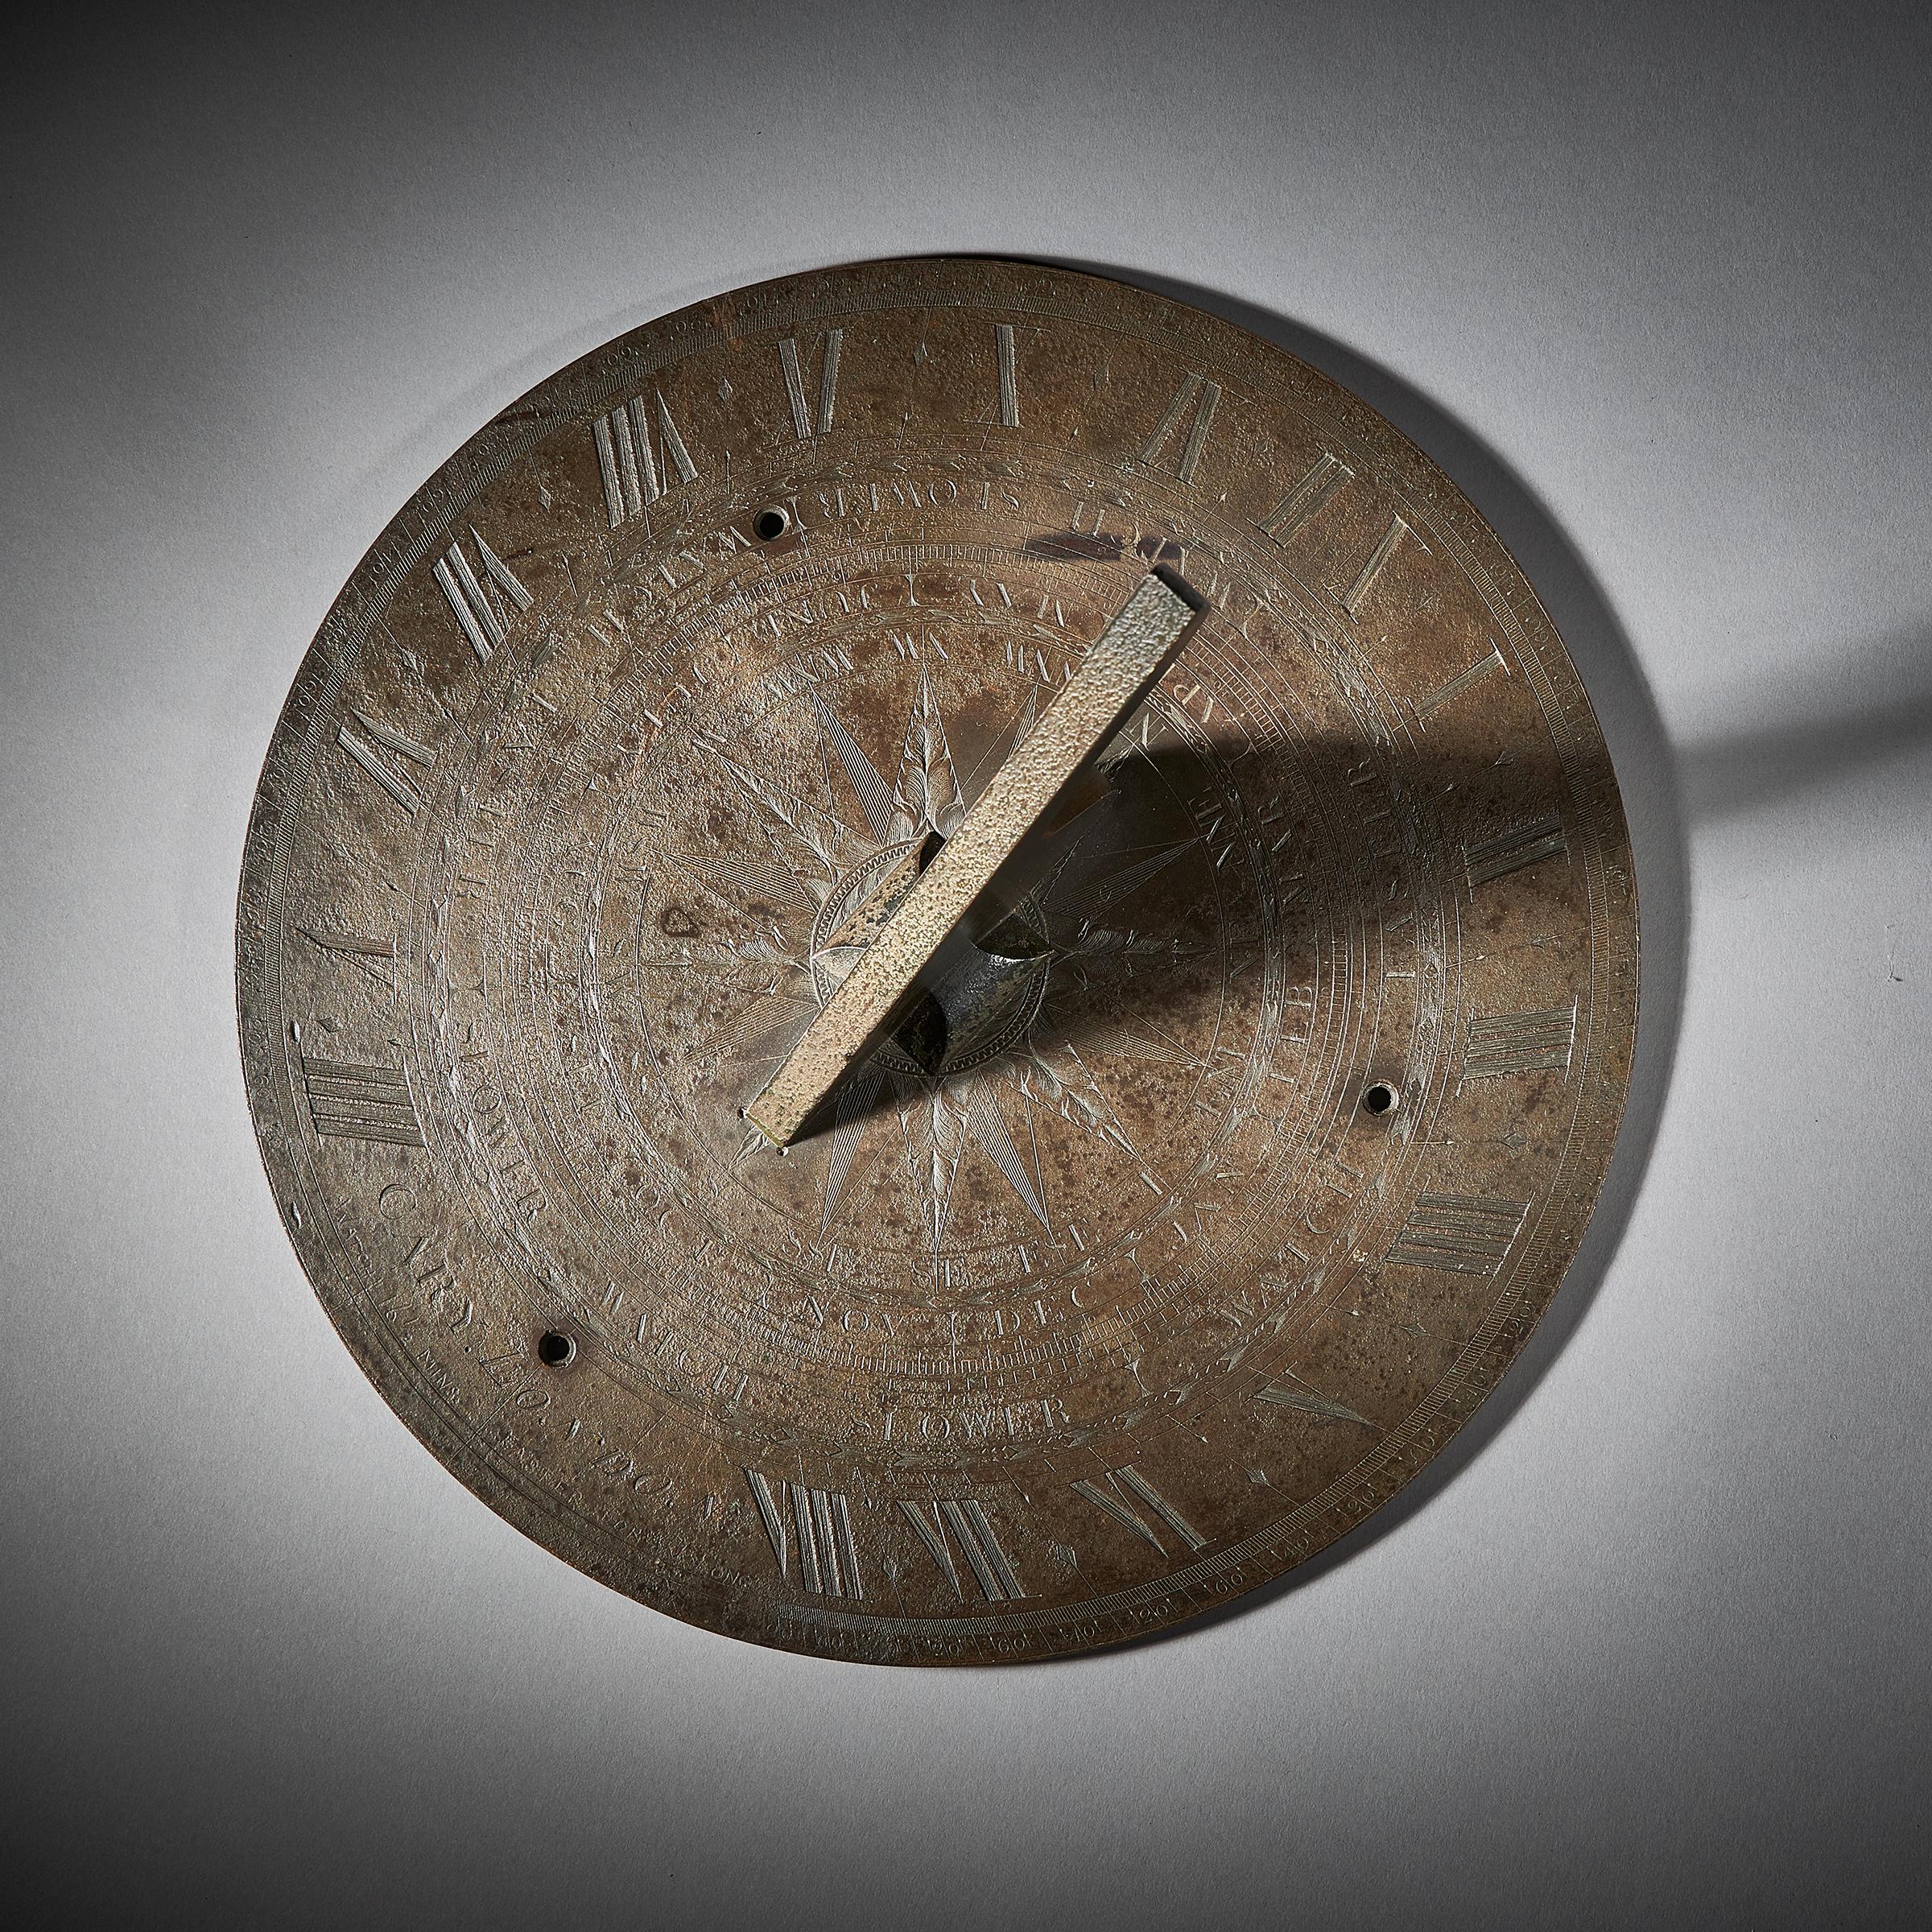 An early 19th century horizontal sundial by Cary London. 

This 12” diameter bronze sundial is finely engraved and has a 16 point compass rose in the middle. The sundial was meant to be used outside in a garden on the latitude of the London area.